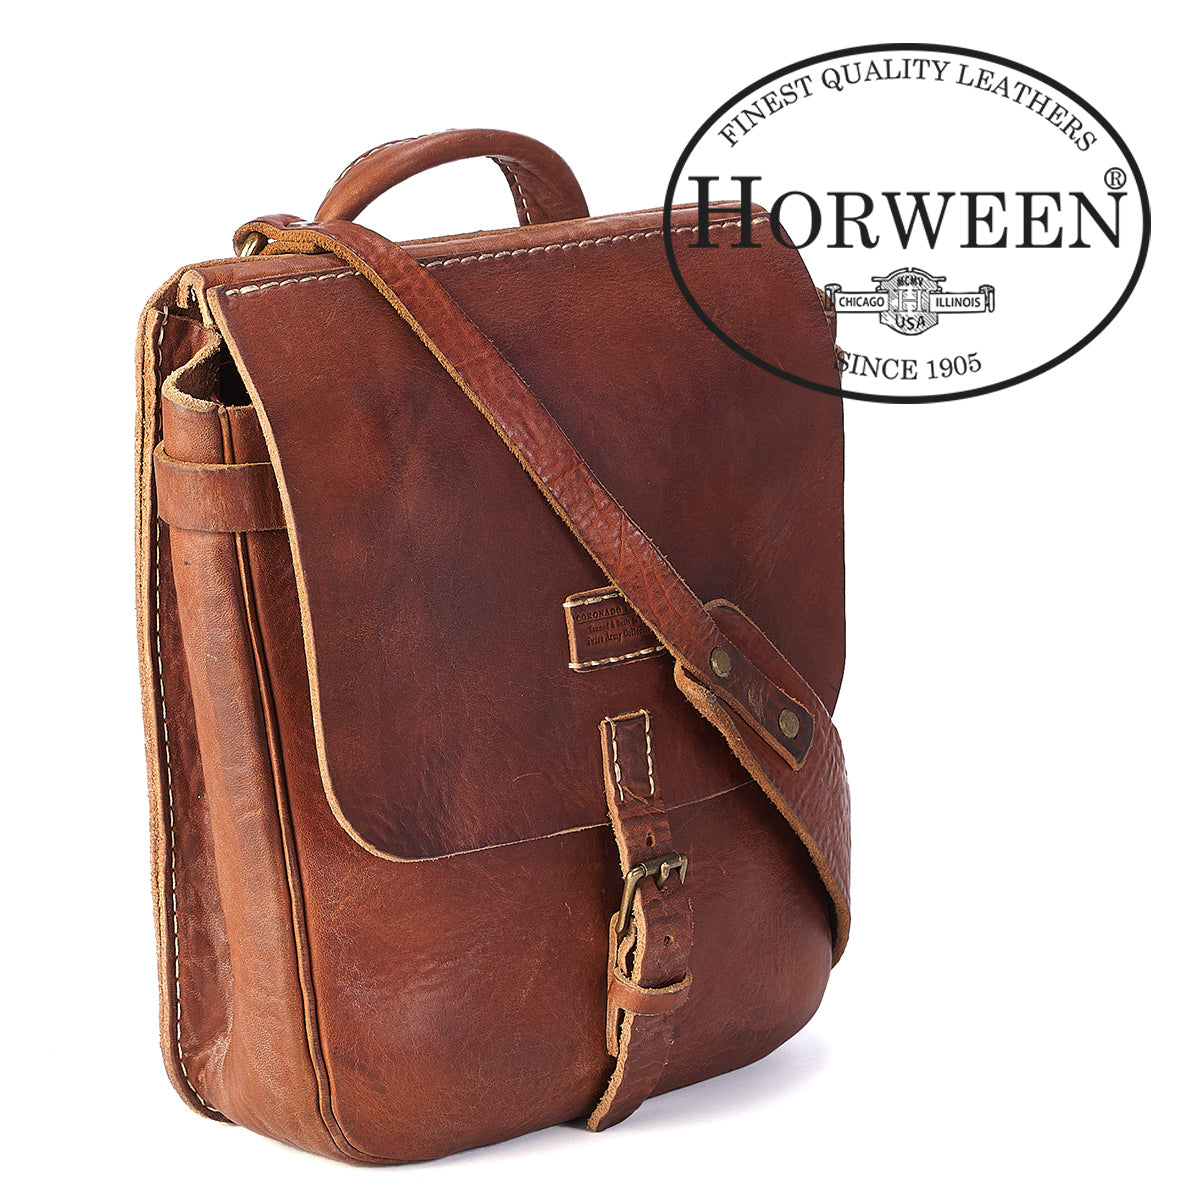 American Horween HORWEEN North American Oil Wax Leather Cavalry